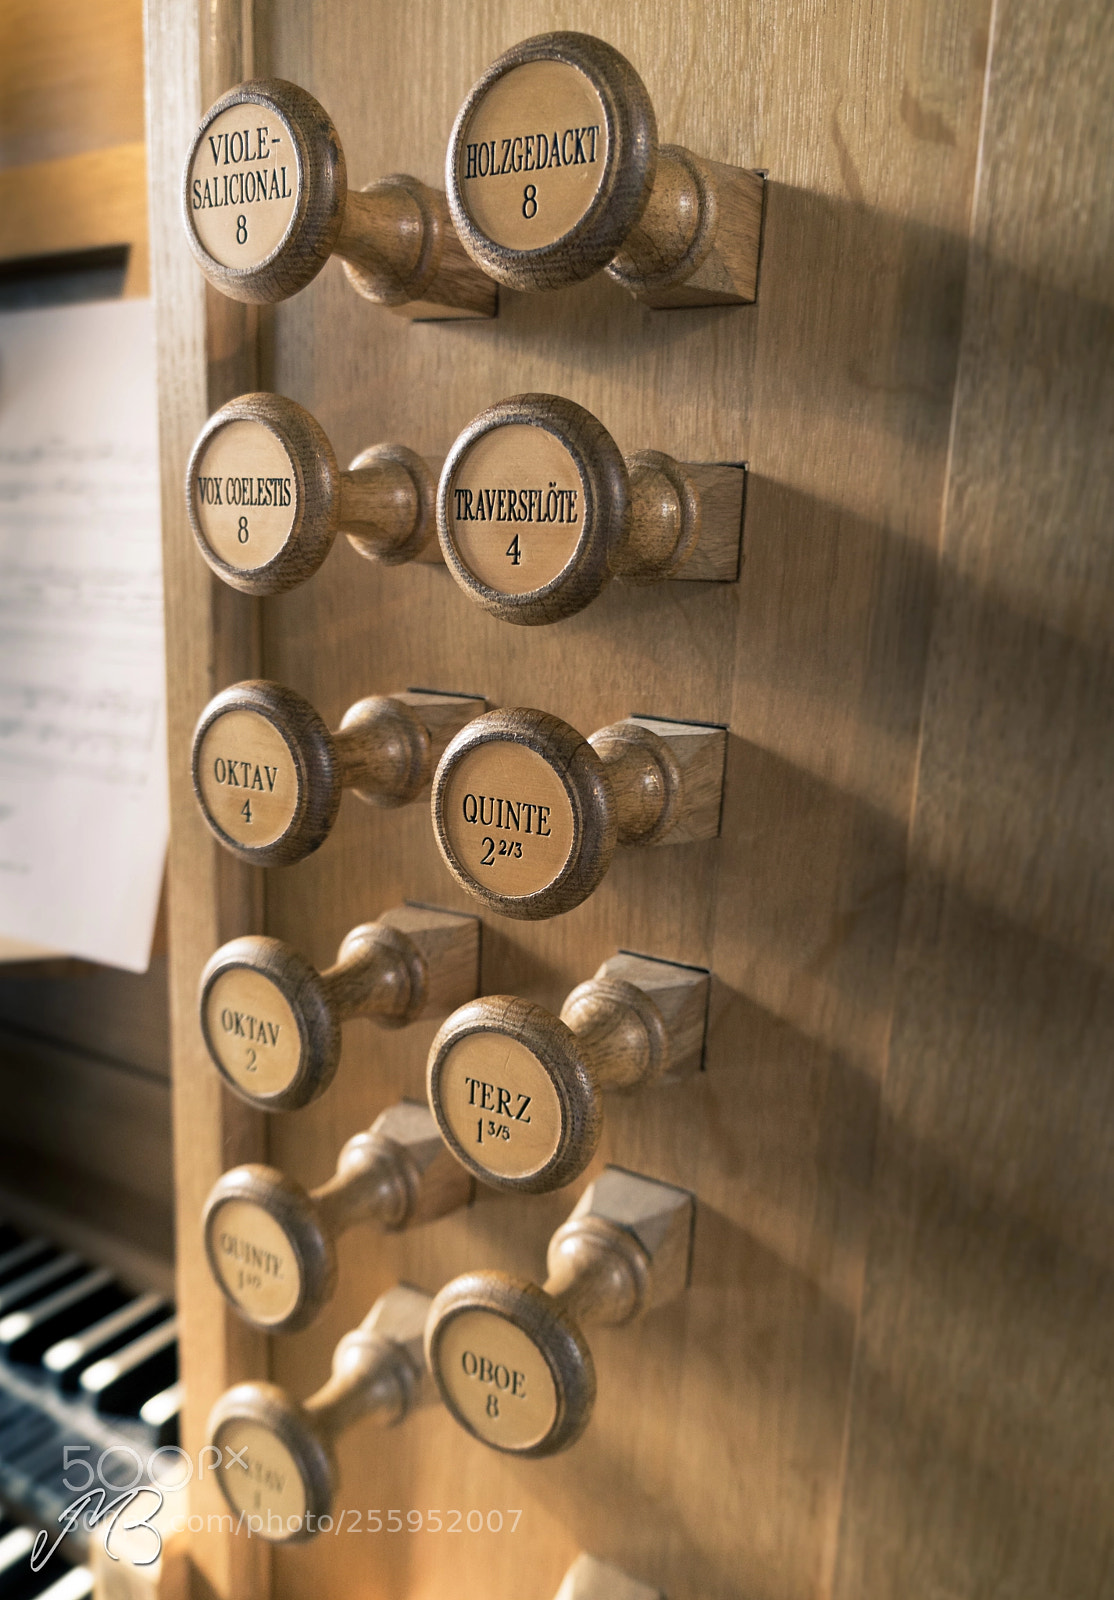 Sony a5100 sample photo. Pipe organ stops photography